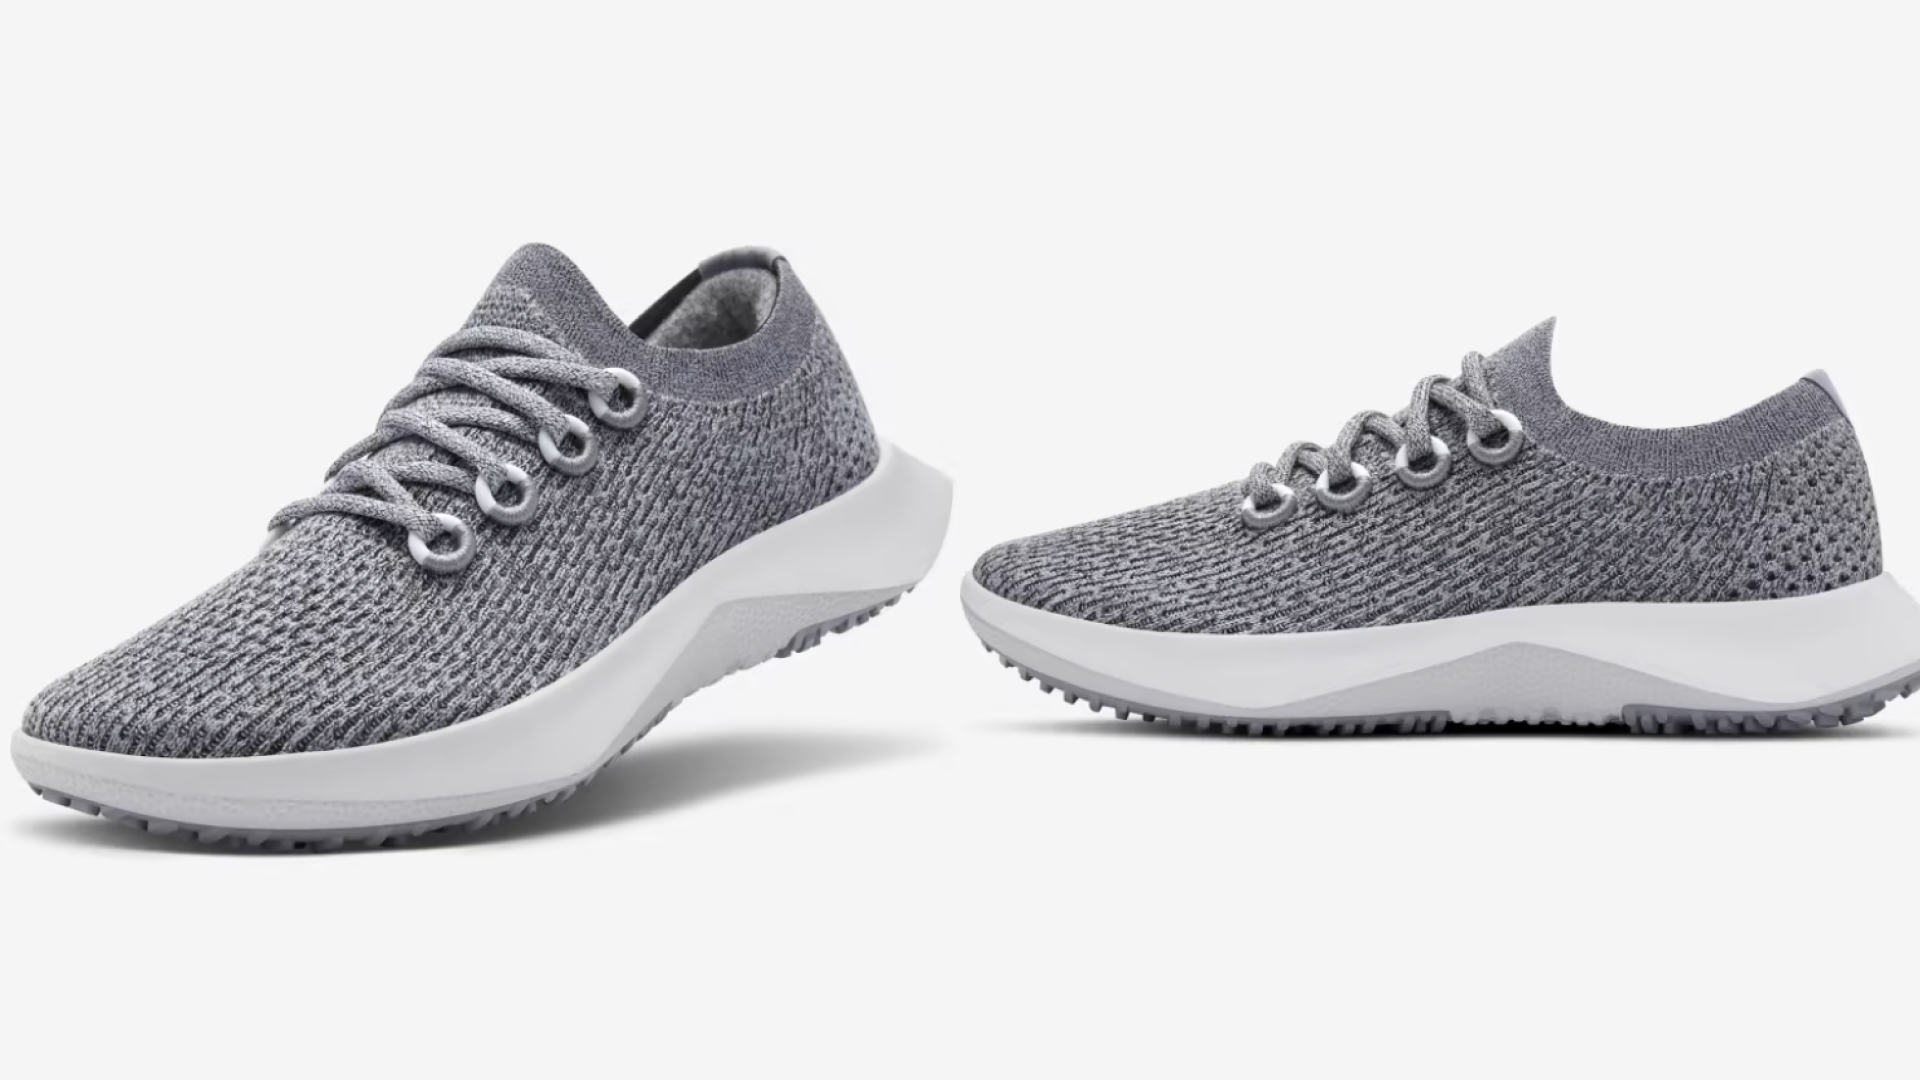 Allbirds to Sell Wool and Tree-Based Workout Clothes, Taking on Nike and  Lululemon - WSJ